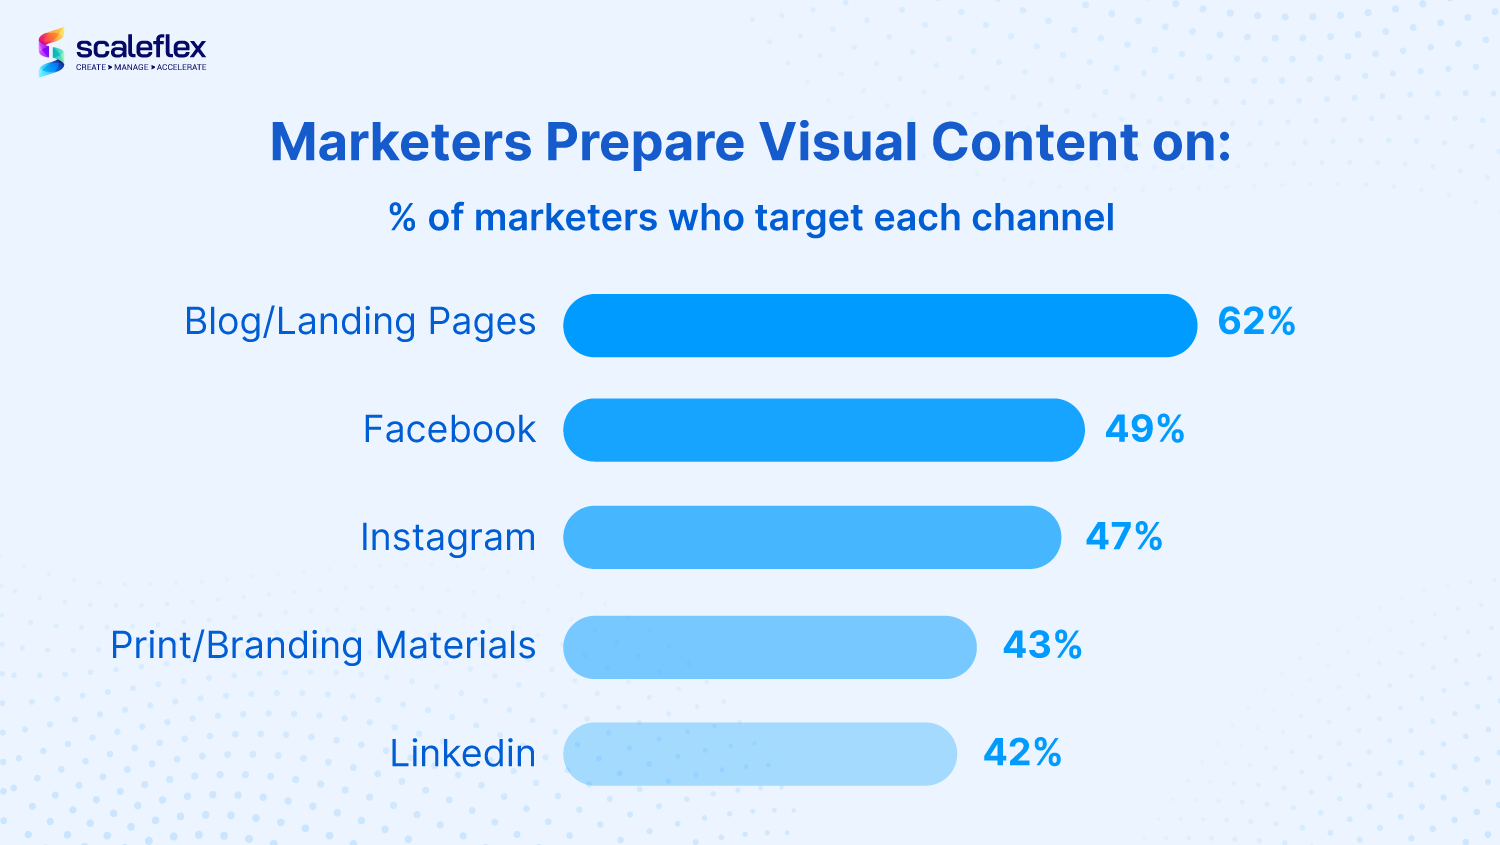 Marketing Channels with Visual Content